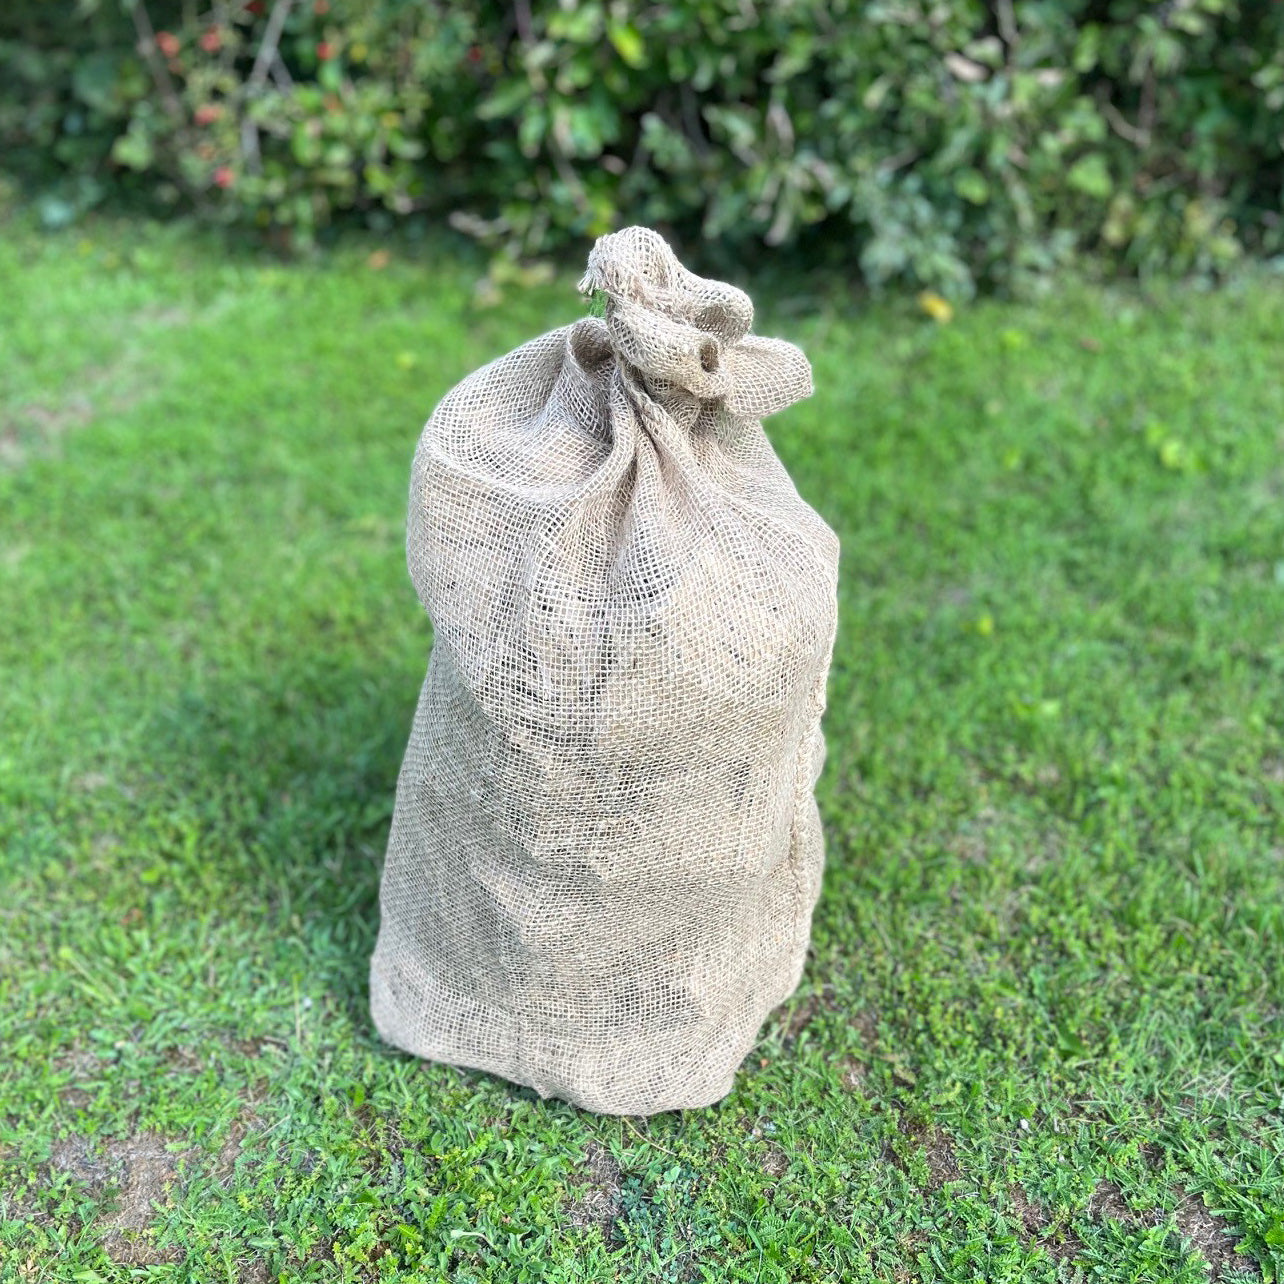 Burlap Bags Sand Bagspotato Sack Race Bagplayers Outdoor Lawn Games  Storage Of Food And Produce2 Pack  Fruugo IN